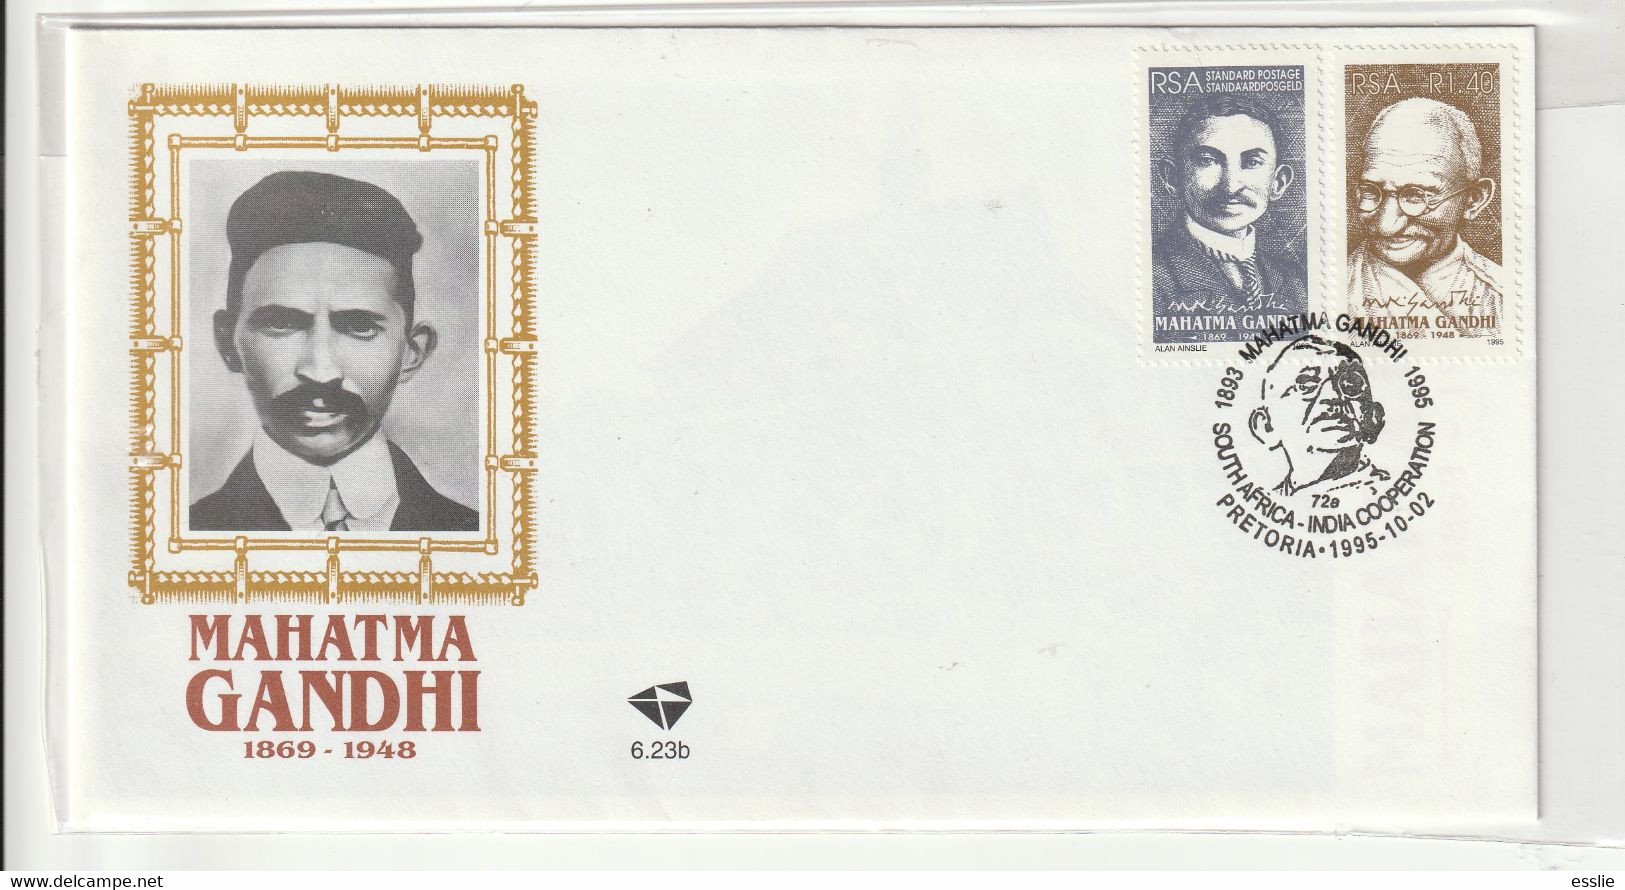 South Africa RSA - 1995 - Mahatma Gandhi Commemoration FDC - Covers & Documents